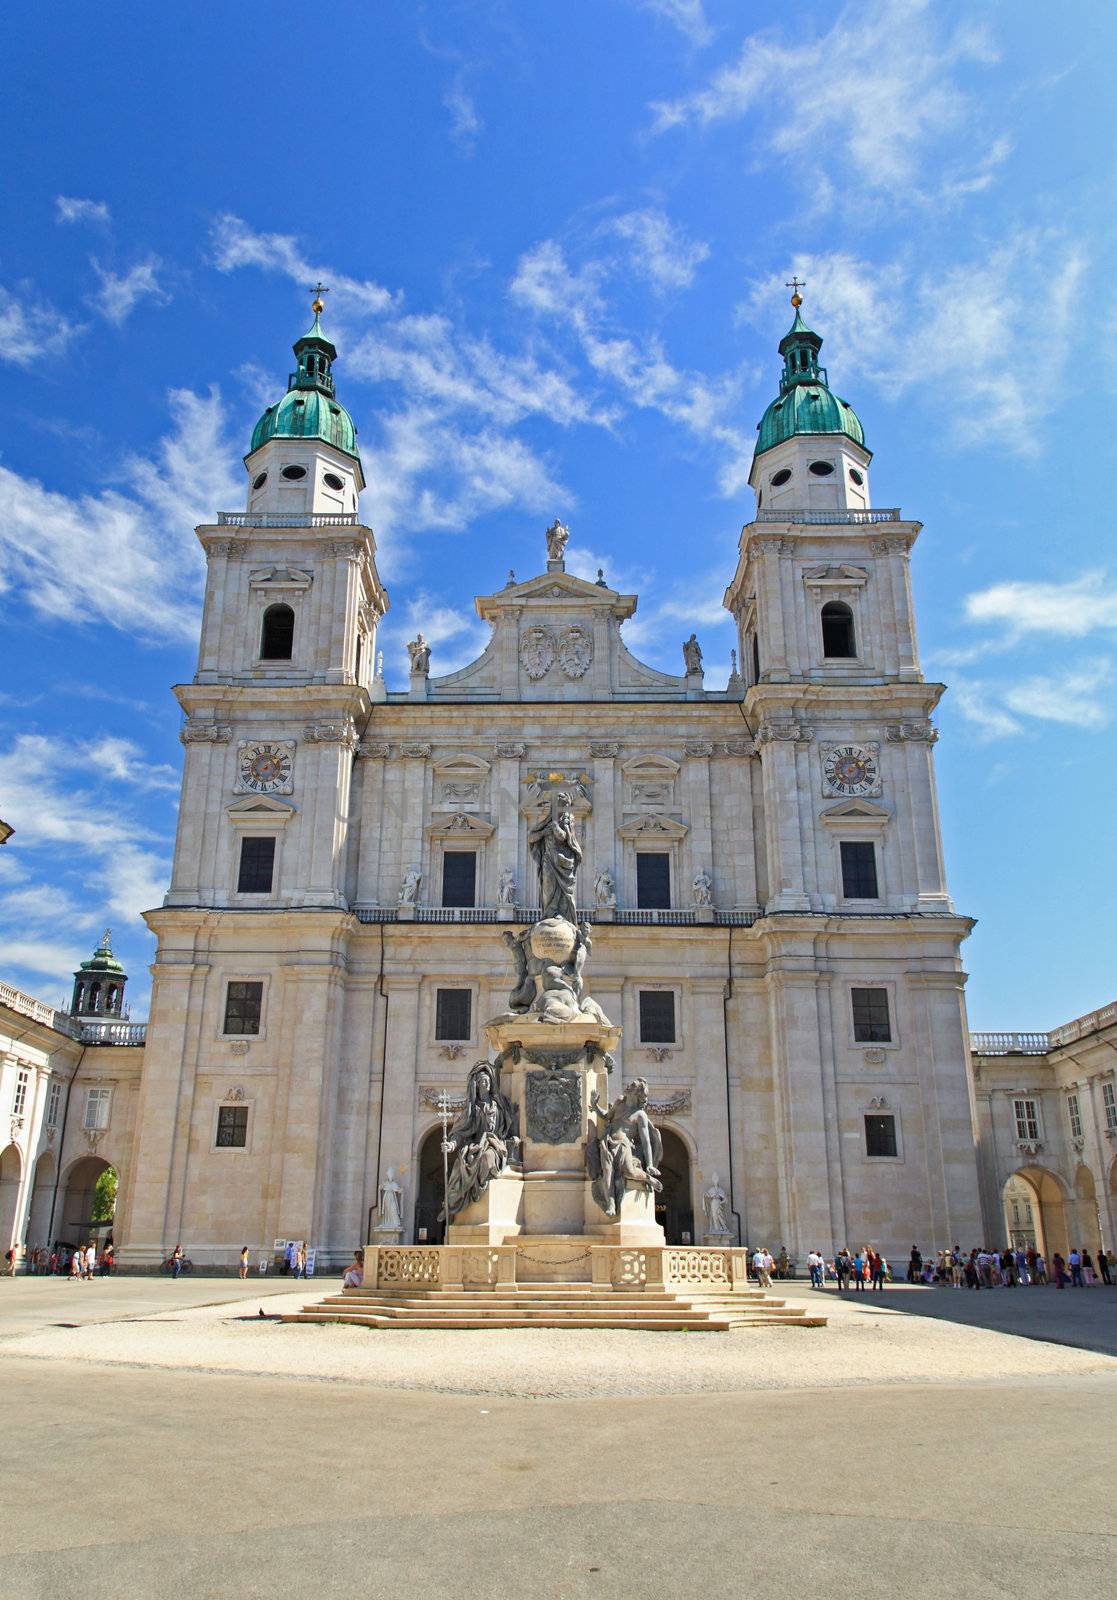 The Dome Cathedral in City Center of Salzburg, Austria